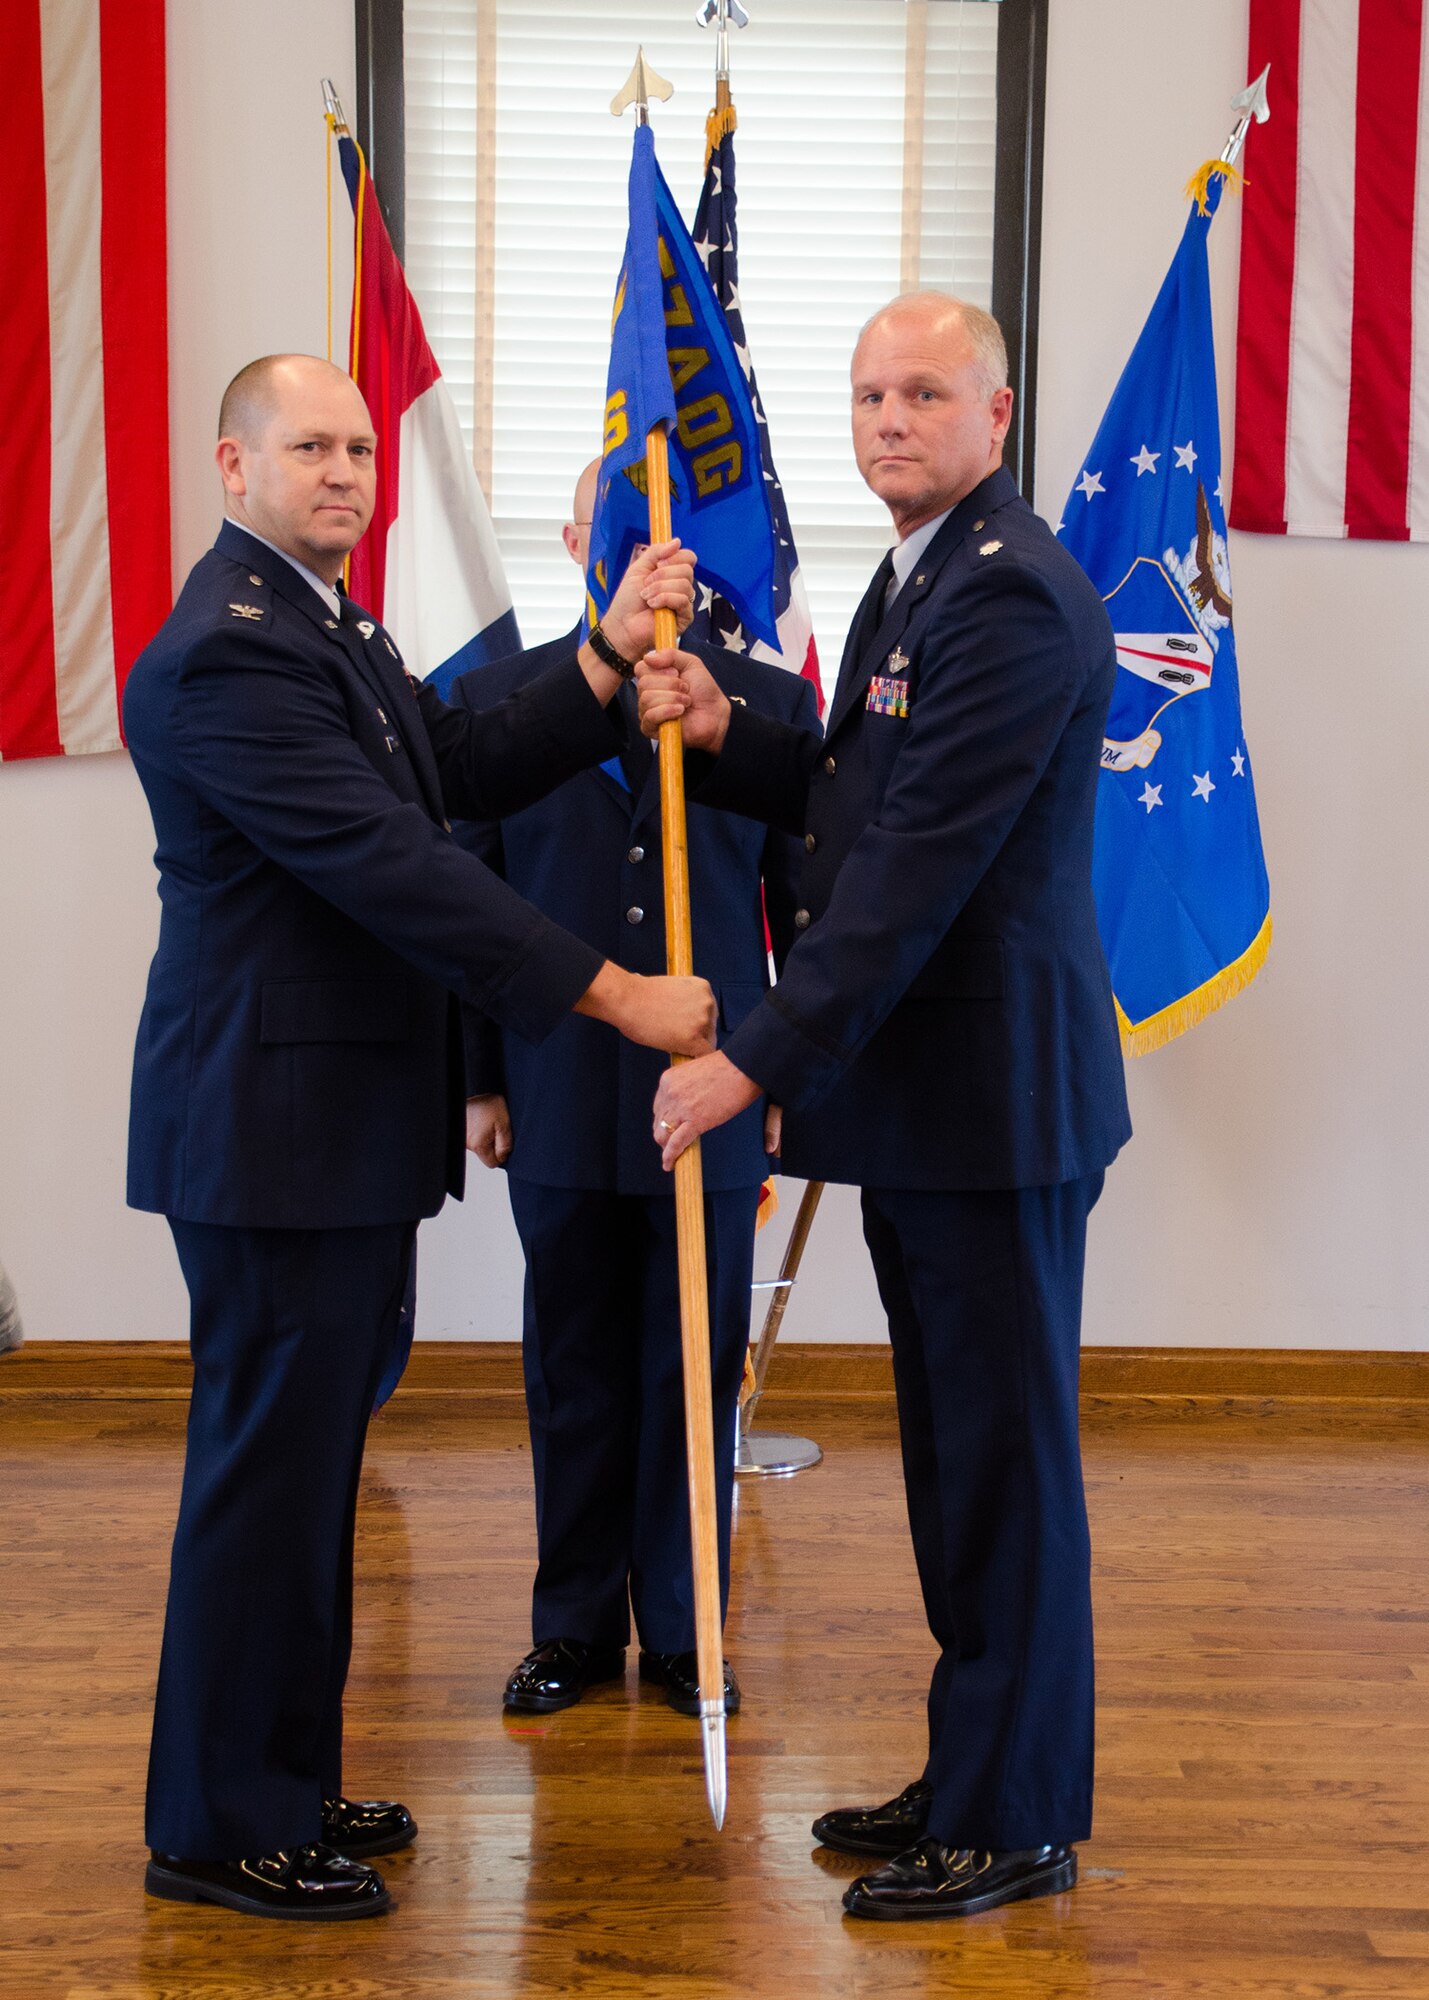 Col. William Boothman, 157th Air Operations Group commander, hands the unit guidon, and with it, leadership authority, to Lt. Col. James Hendren, 157th Combat Operations Squadron commander, at Jefferson Barracks Air National Guard Base, Missouri, during drill Nov. 5, 2016. Three new commanders took charge of three new squadrons -- the 157th COS, the 157th Air Intelligence Squadron and the 157th Air Communications Squadron, new units of the 157th AOG -- at a single assumption of command ceremony. (U.S. Air National Guard photo by Staff Sgt. Brittany Cannon)